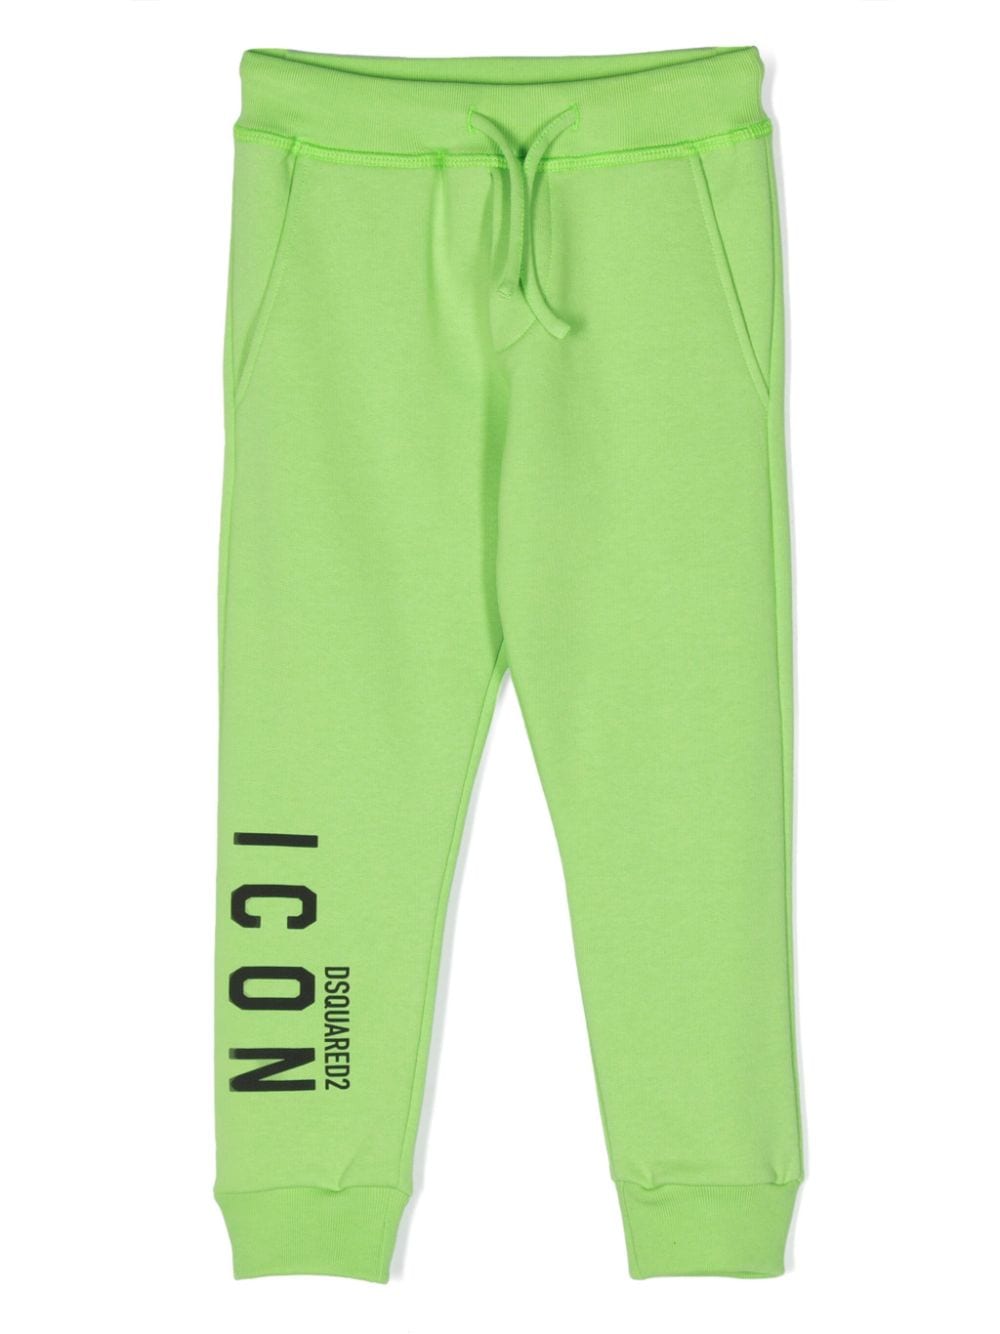 Green sports trousers for boys with print